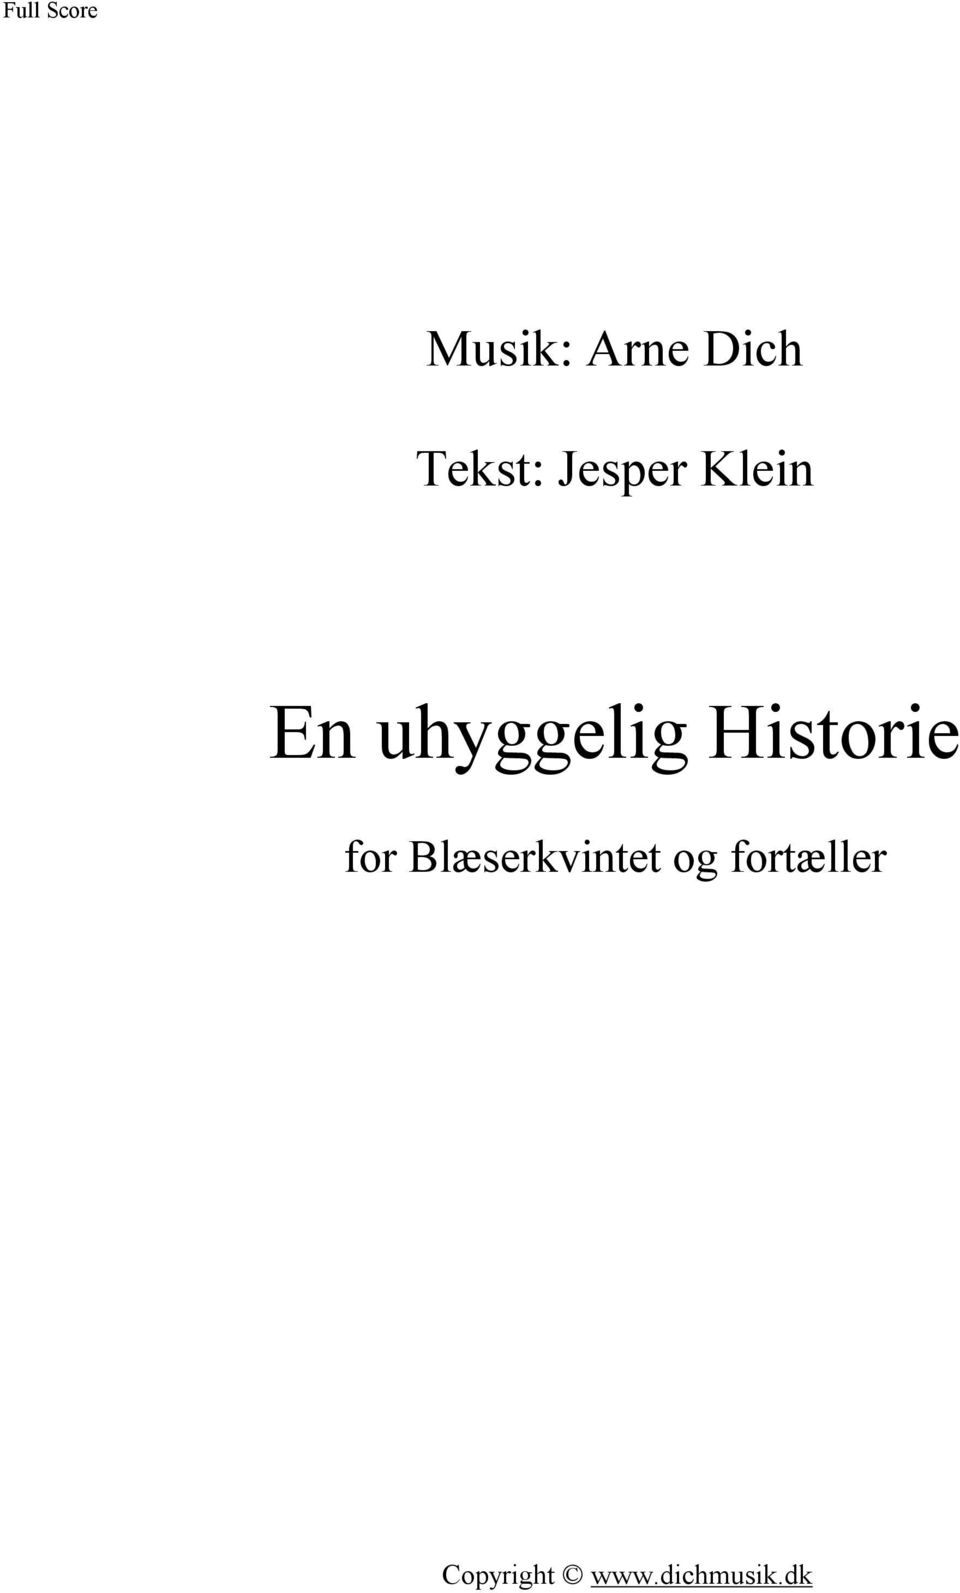 uhyggelig Historie or